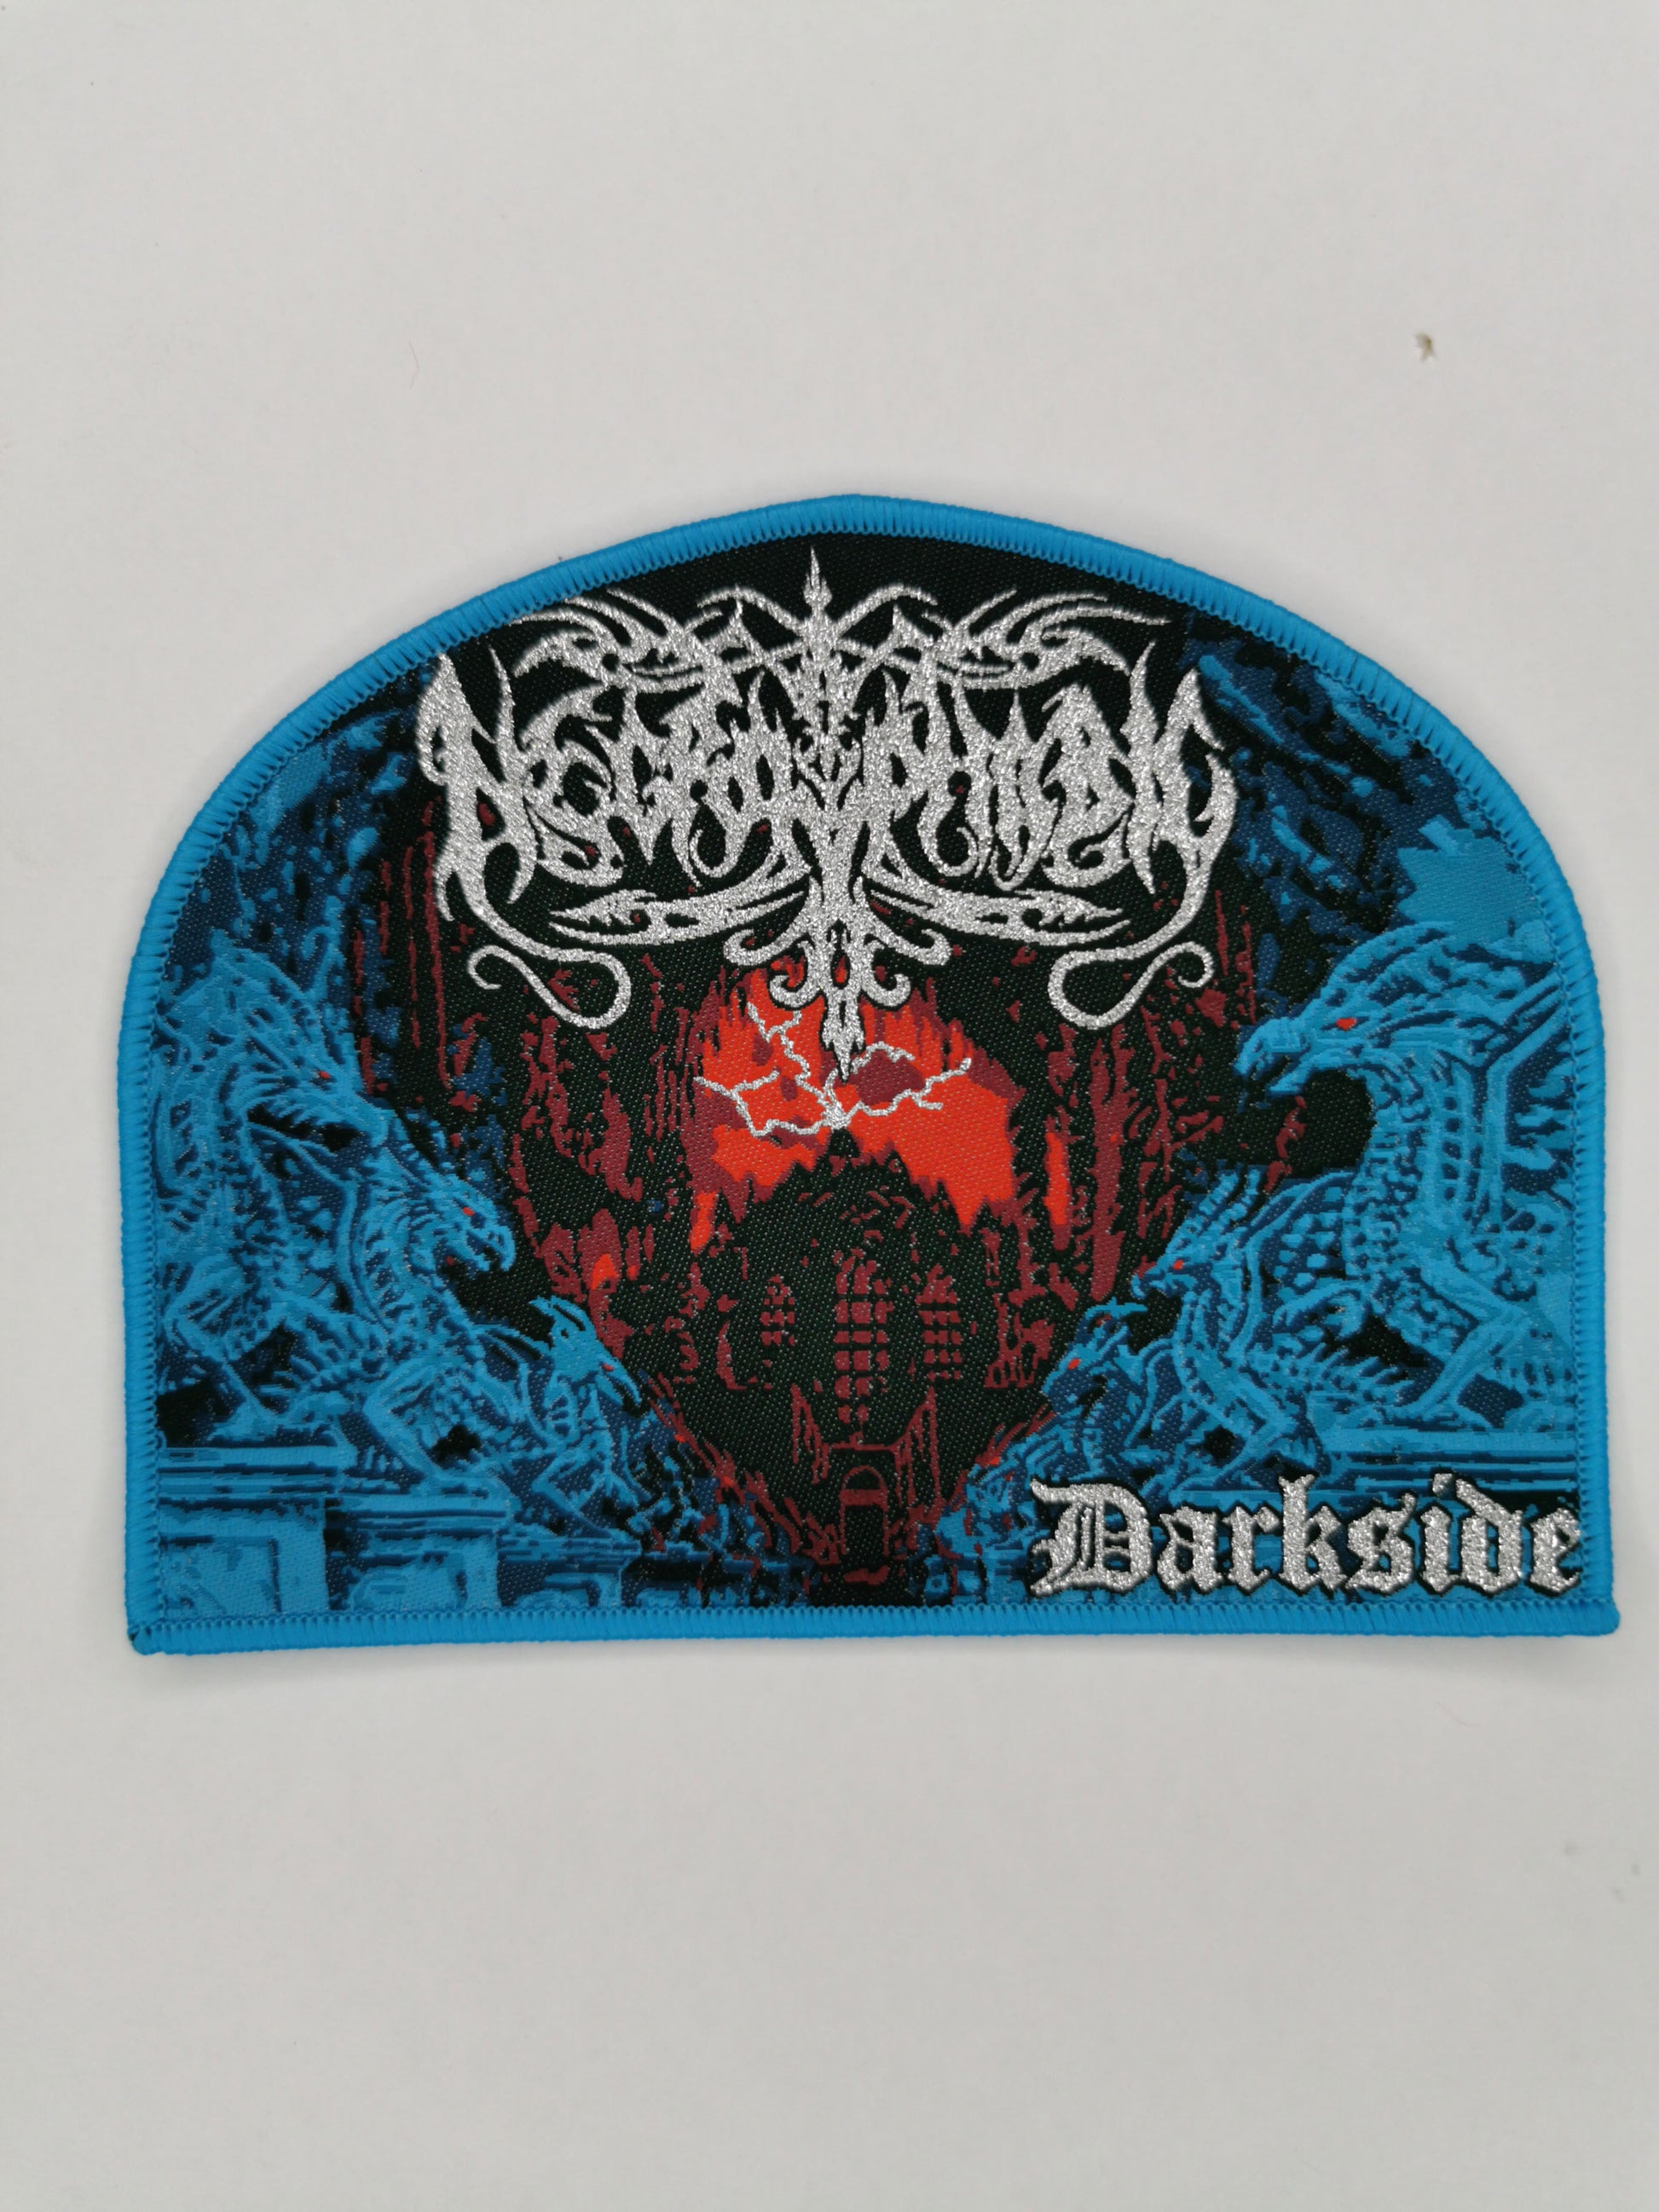 Temporal Dimensions Patches Necrophobic Darkside Blue Border Woven Patch